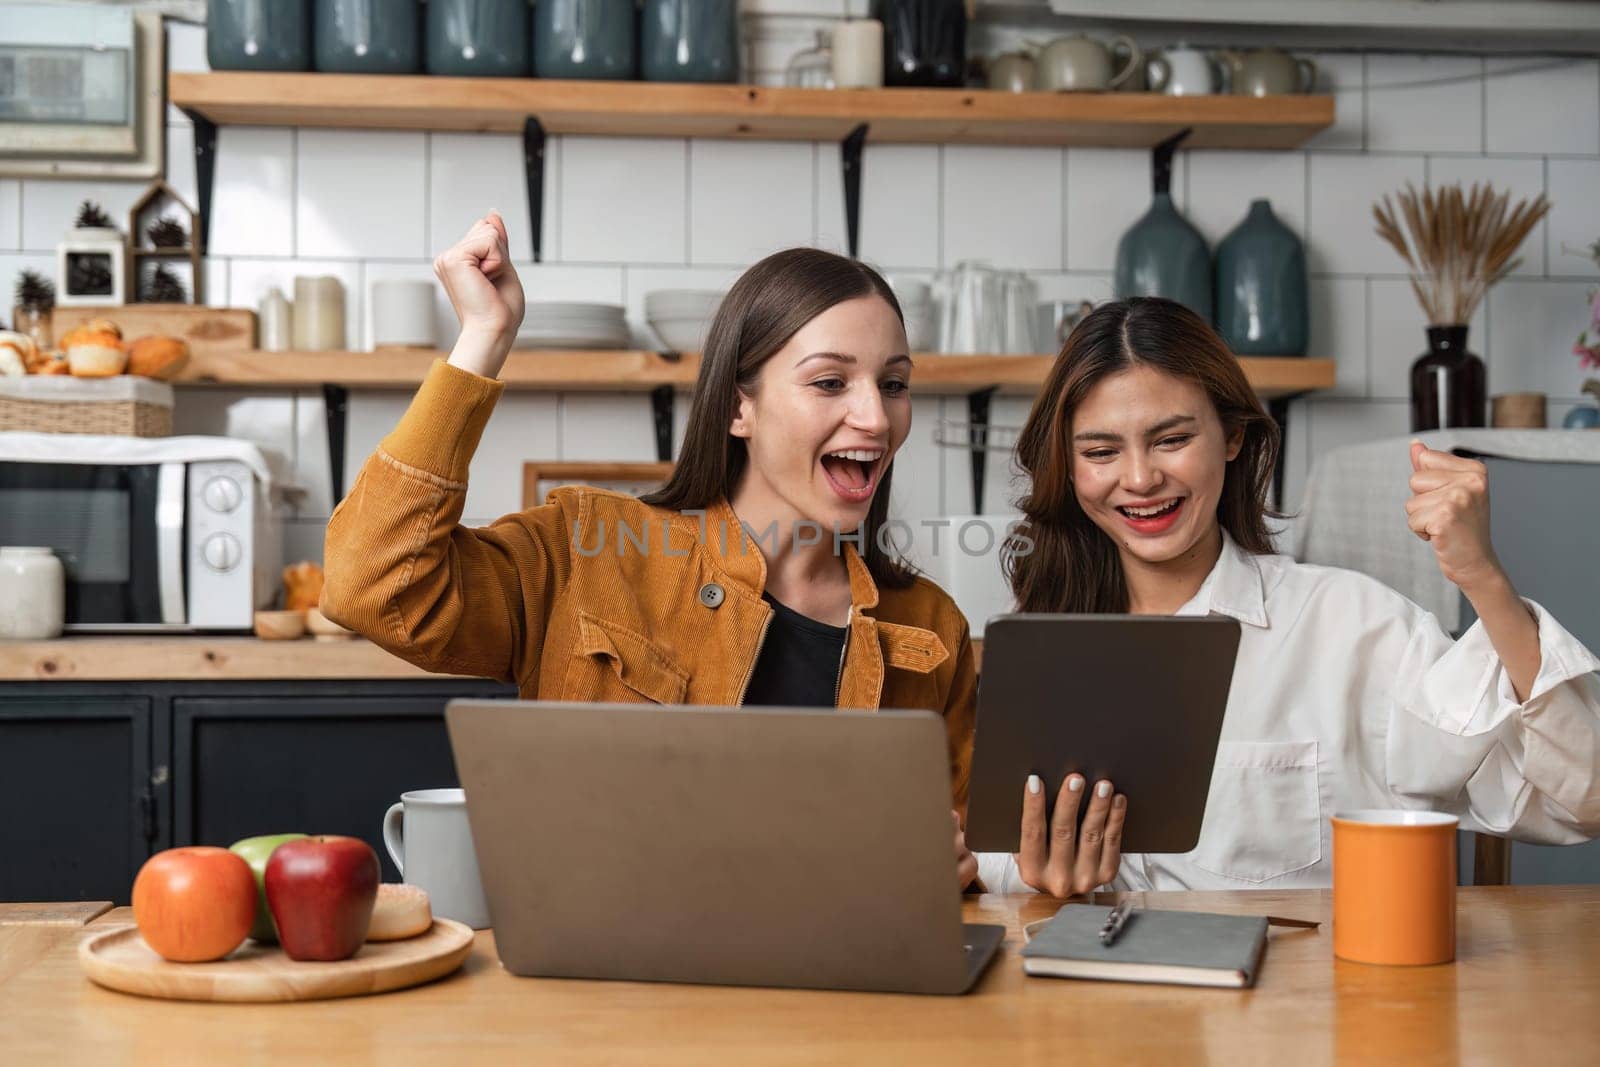 Two happy teenage girls Glad to raise your hand to receive message on tablet resting in kitchen.